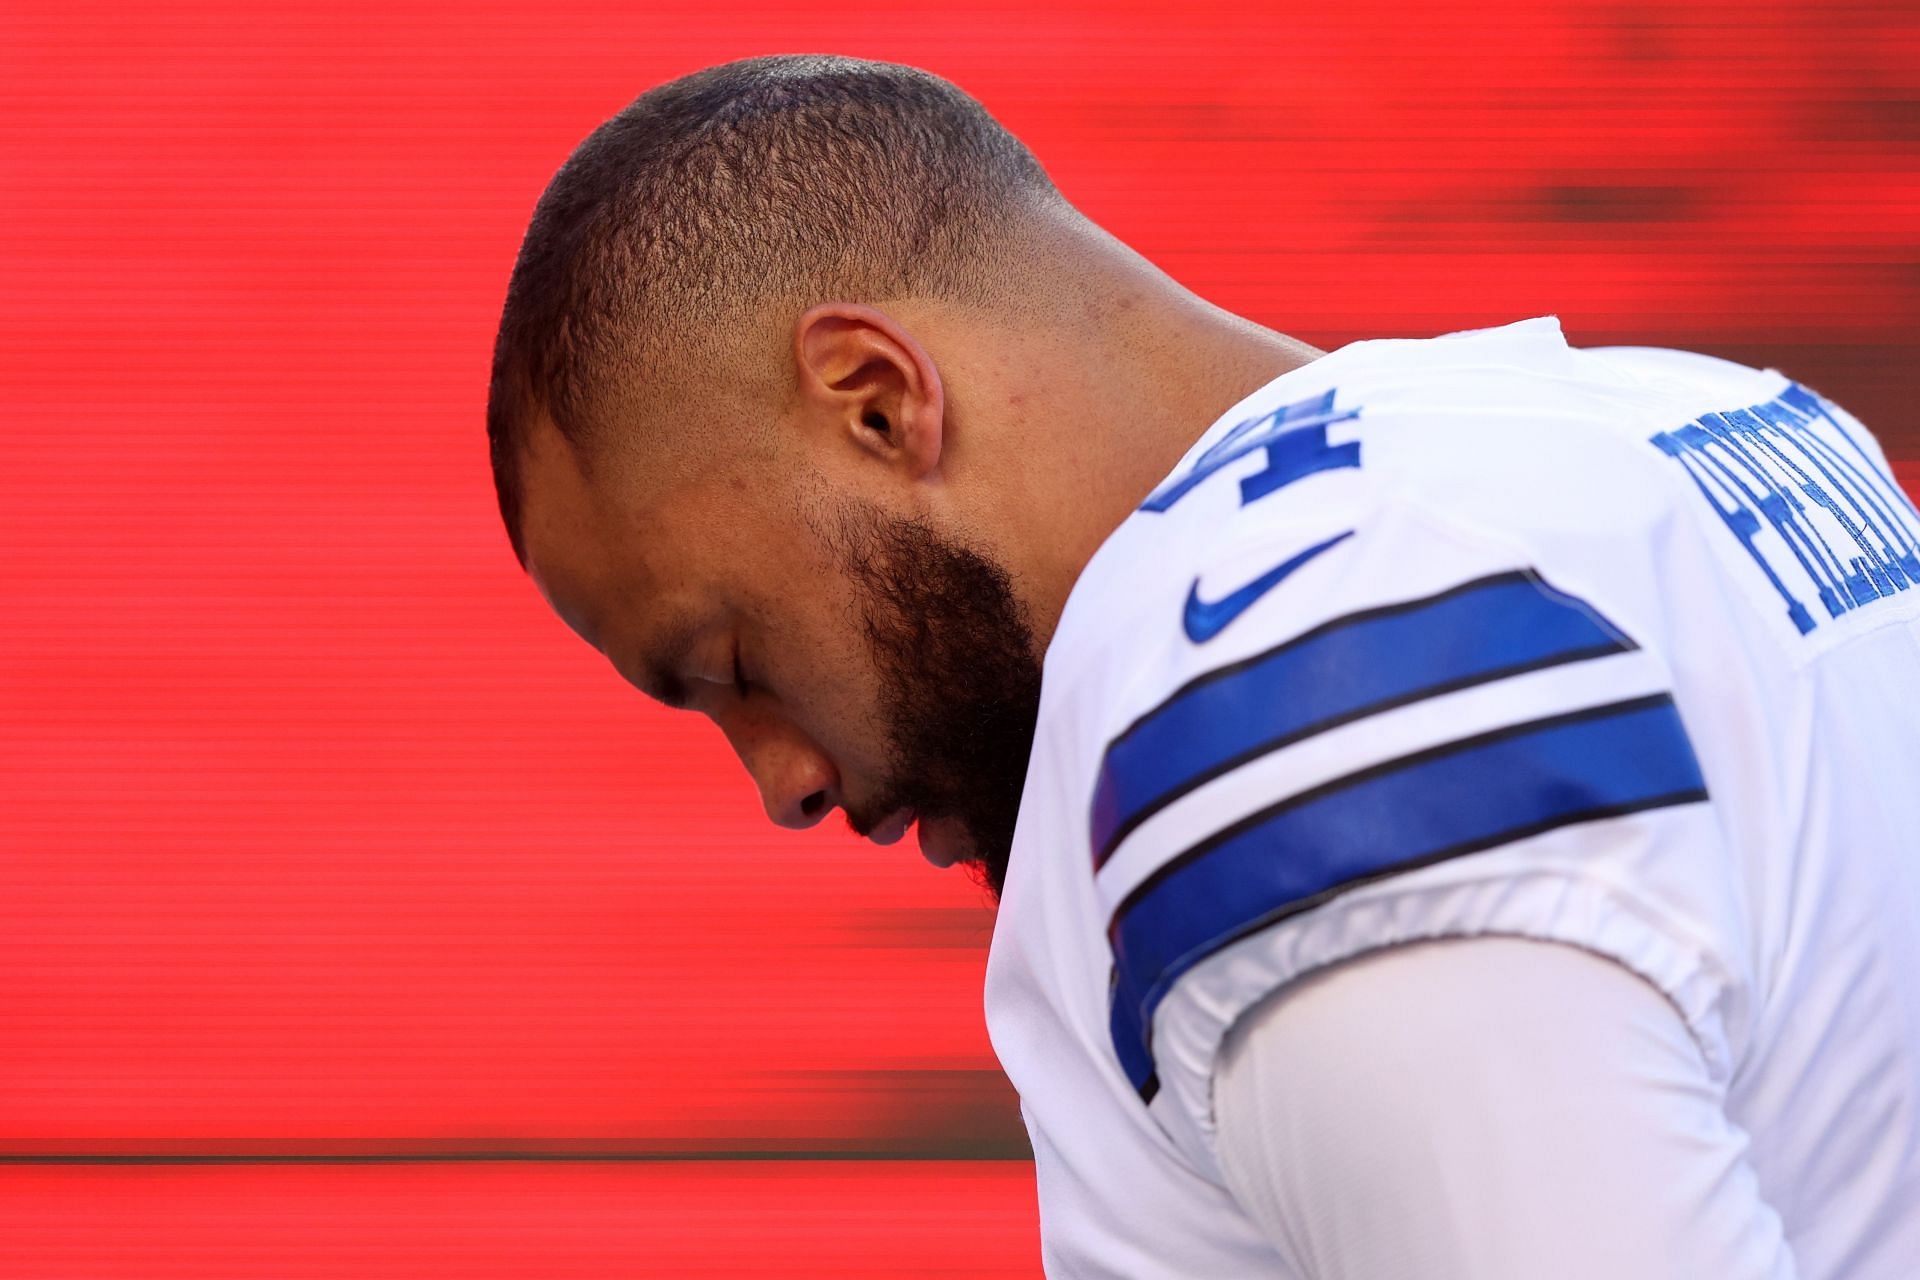 Dak Prescott of the Dallas Cowboys looks on prior to a game against the San Francisco 49ers.